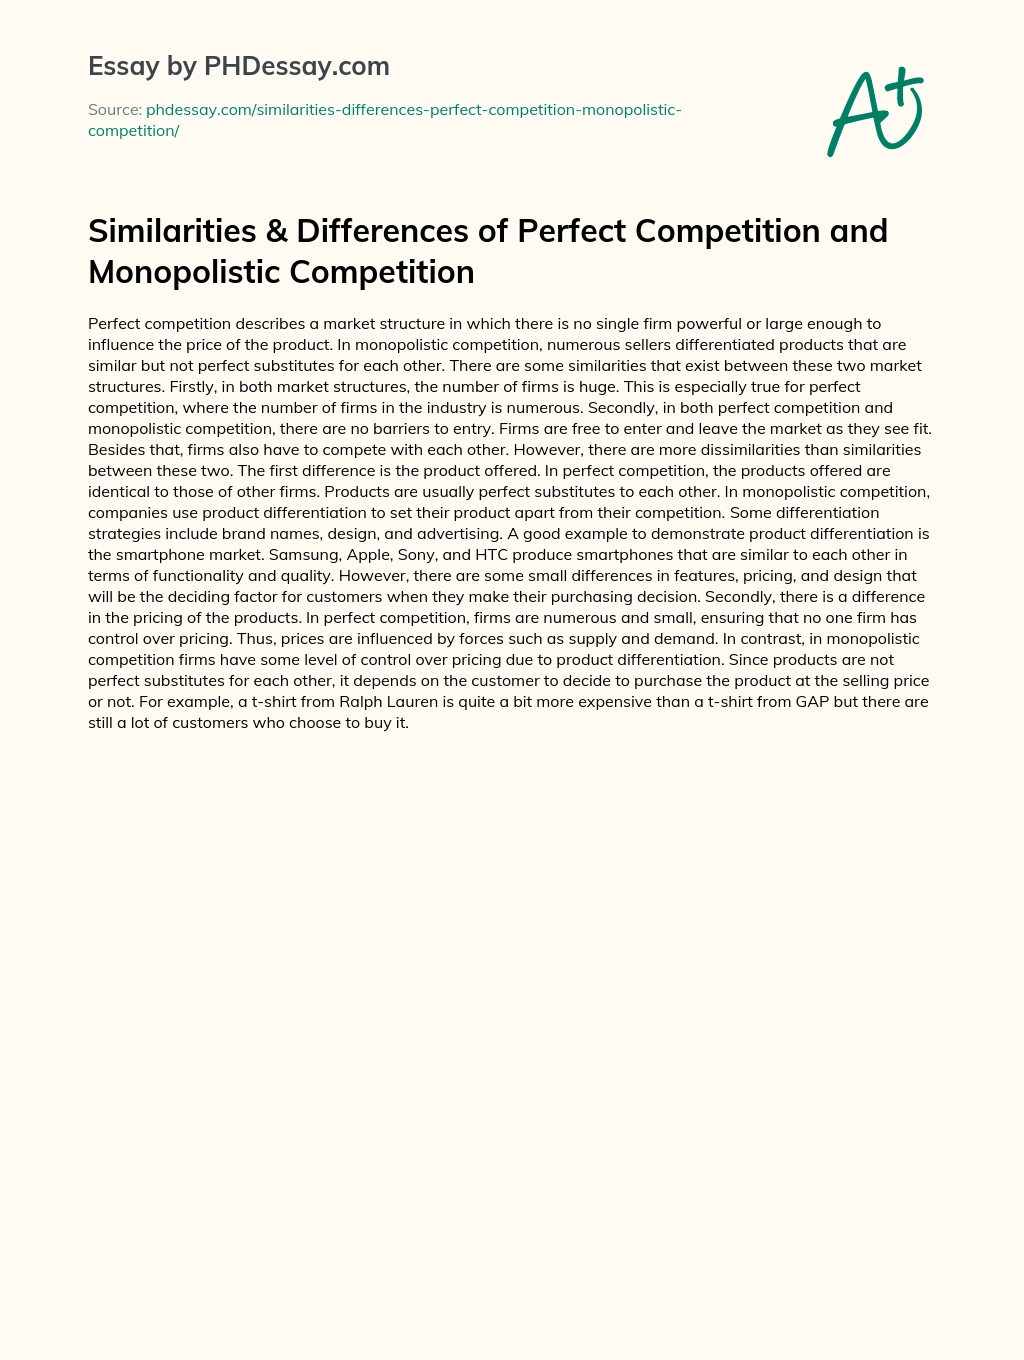 Similarities & Differences of Perfect Competition and Monopolistic Competition essay